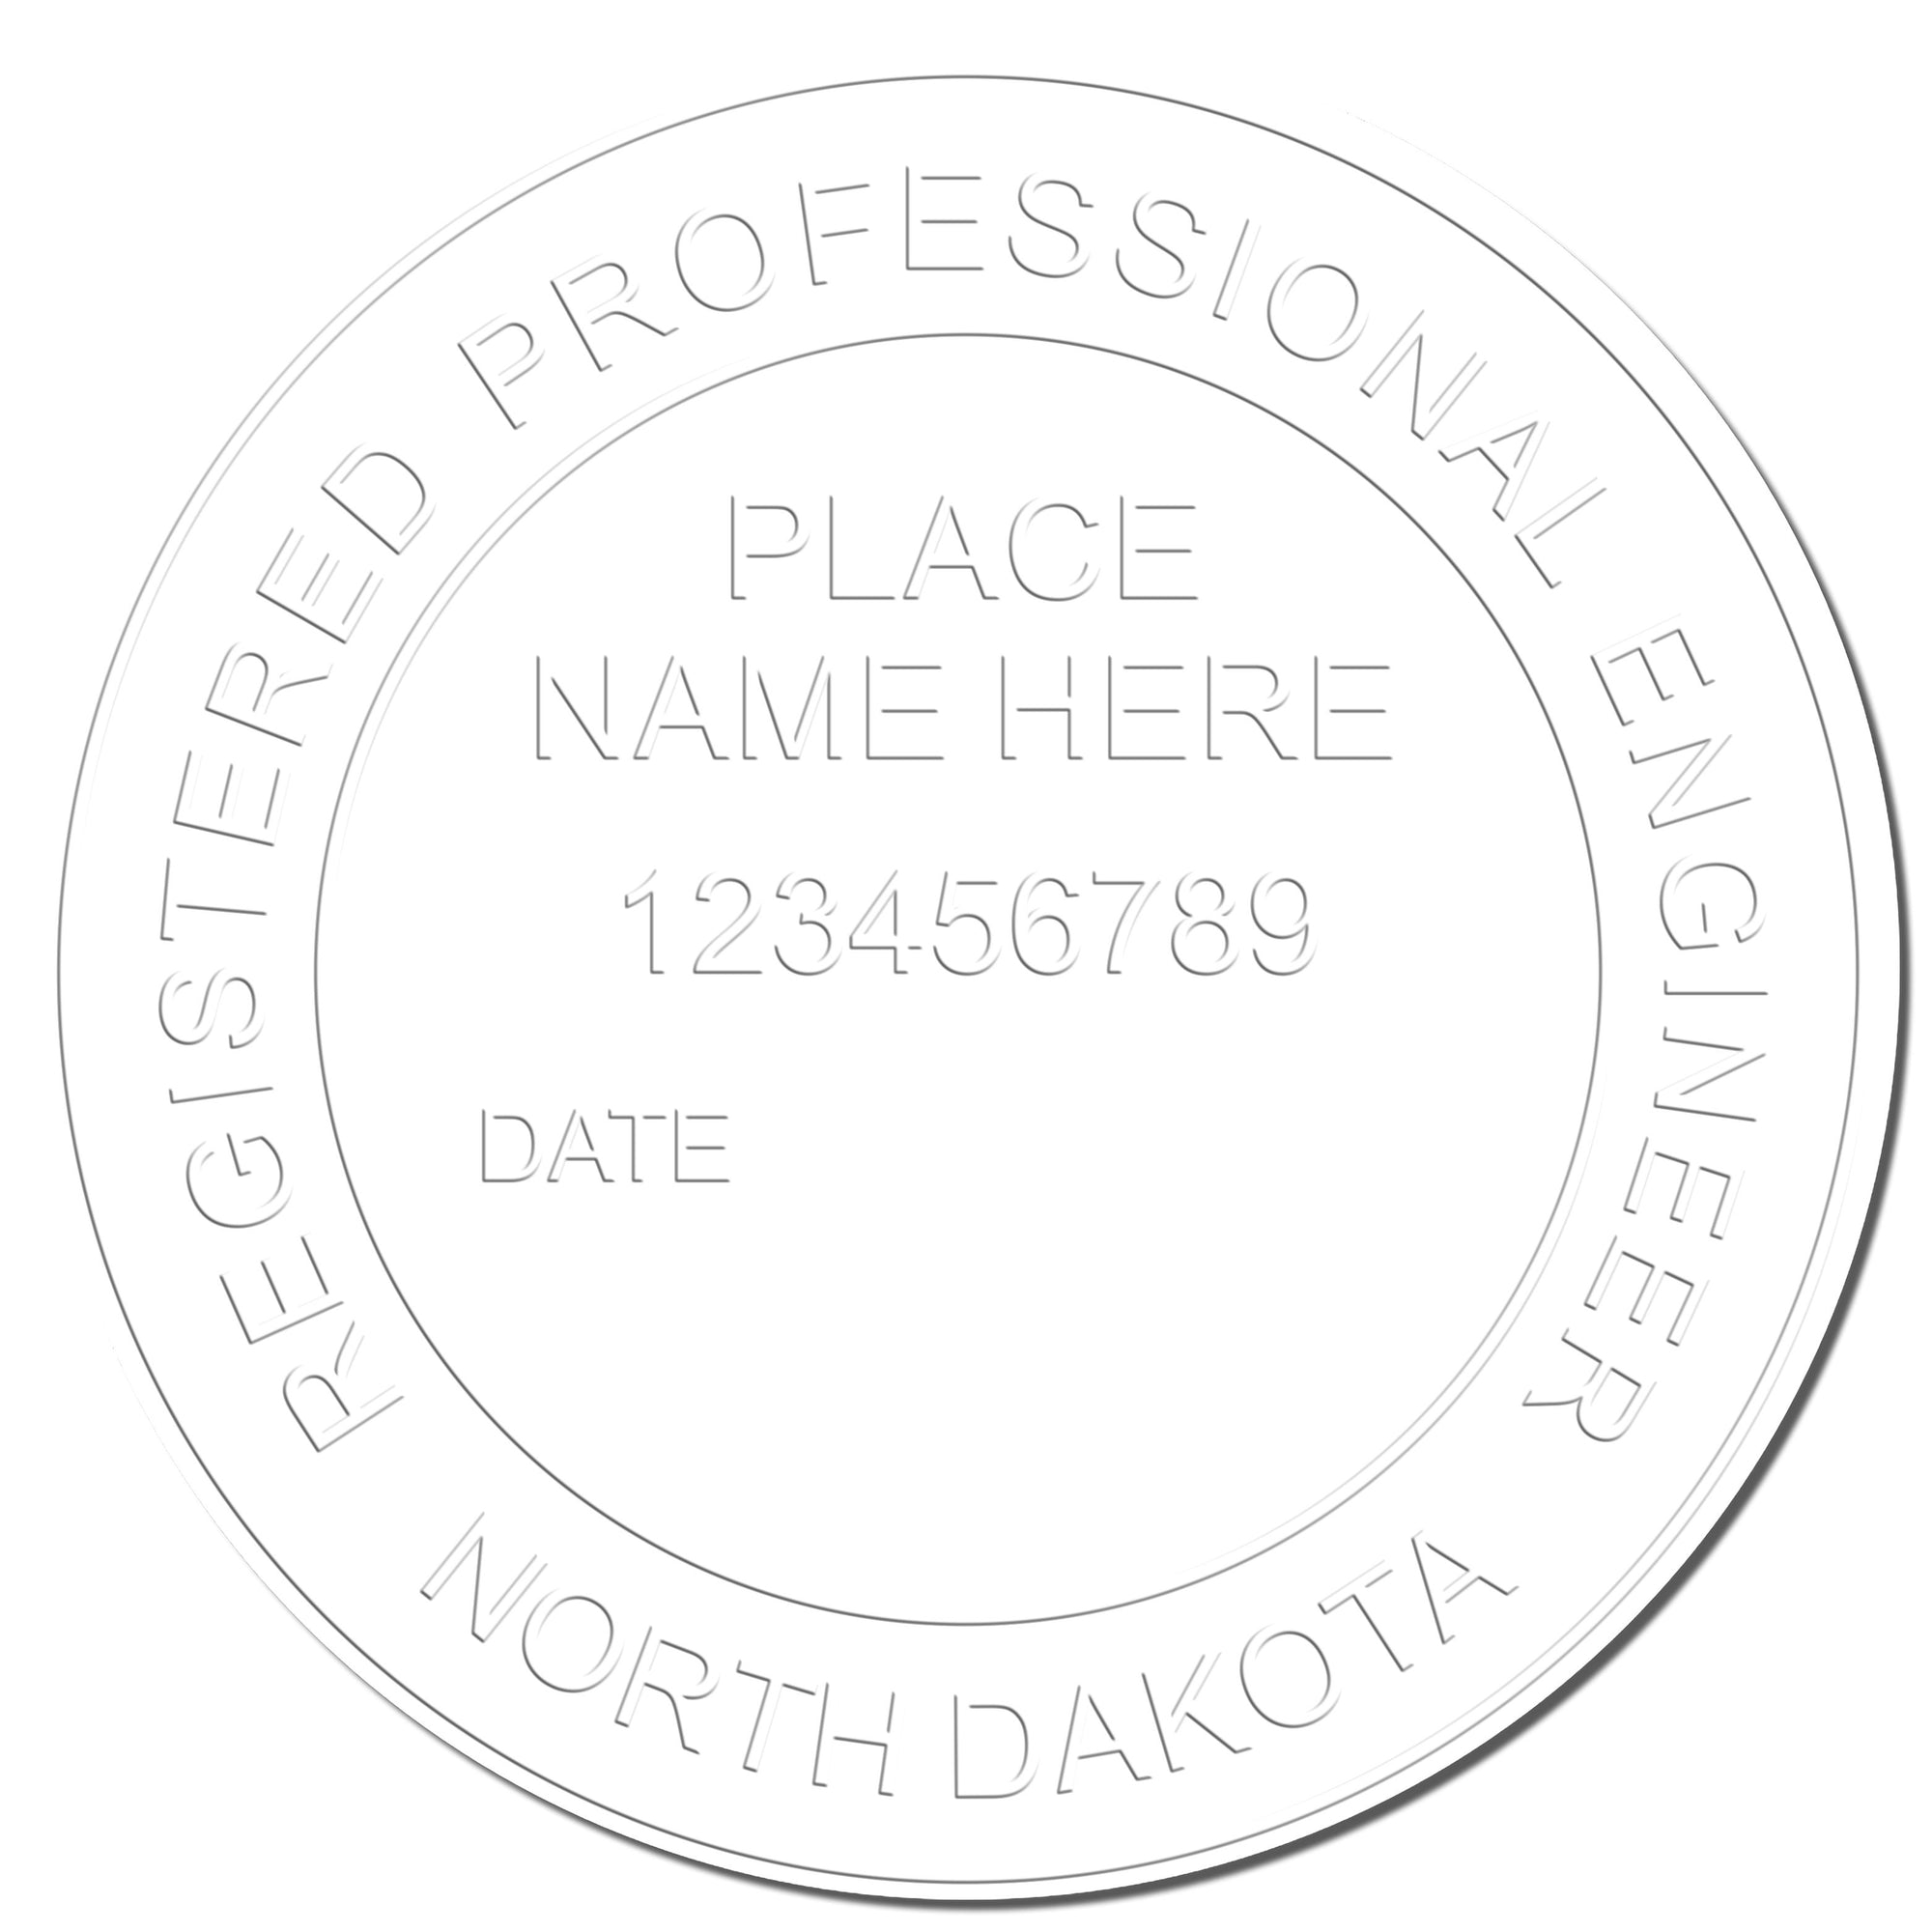 The main image for the North Dakota Engineer Desk Seal depicting a sample of the imprint and electronic files